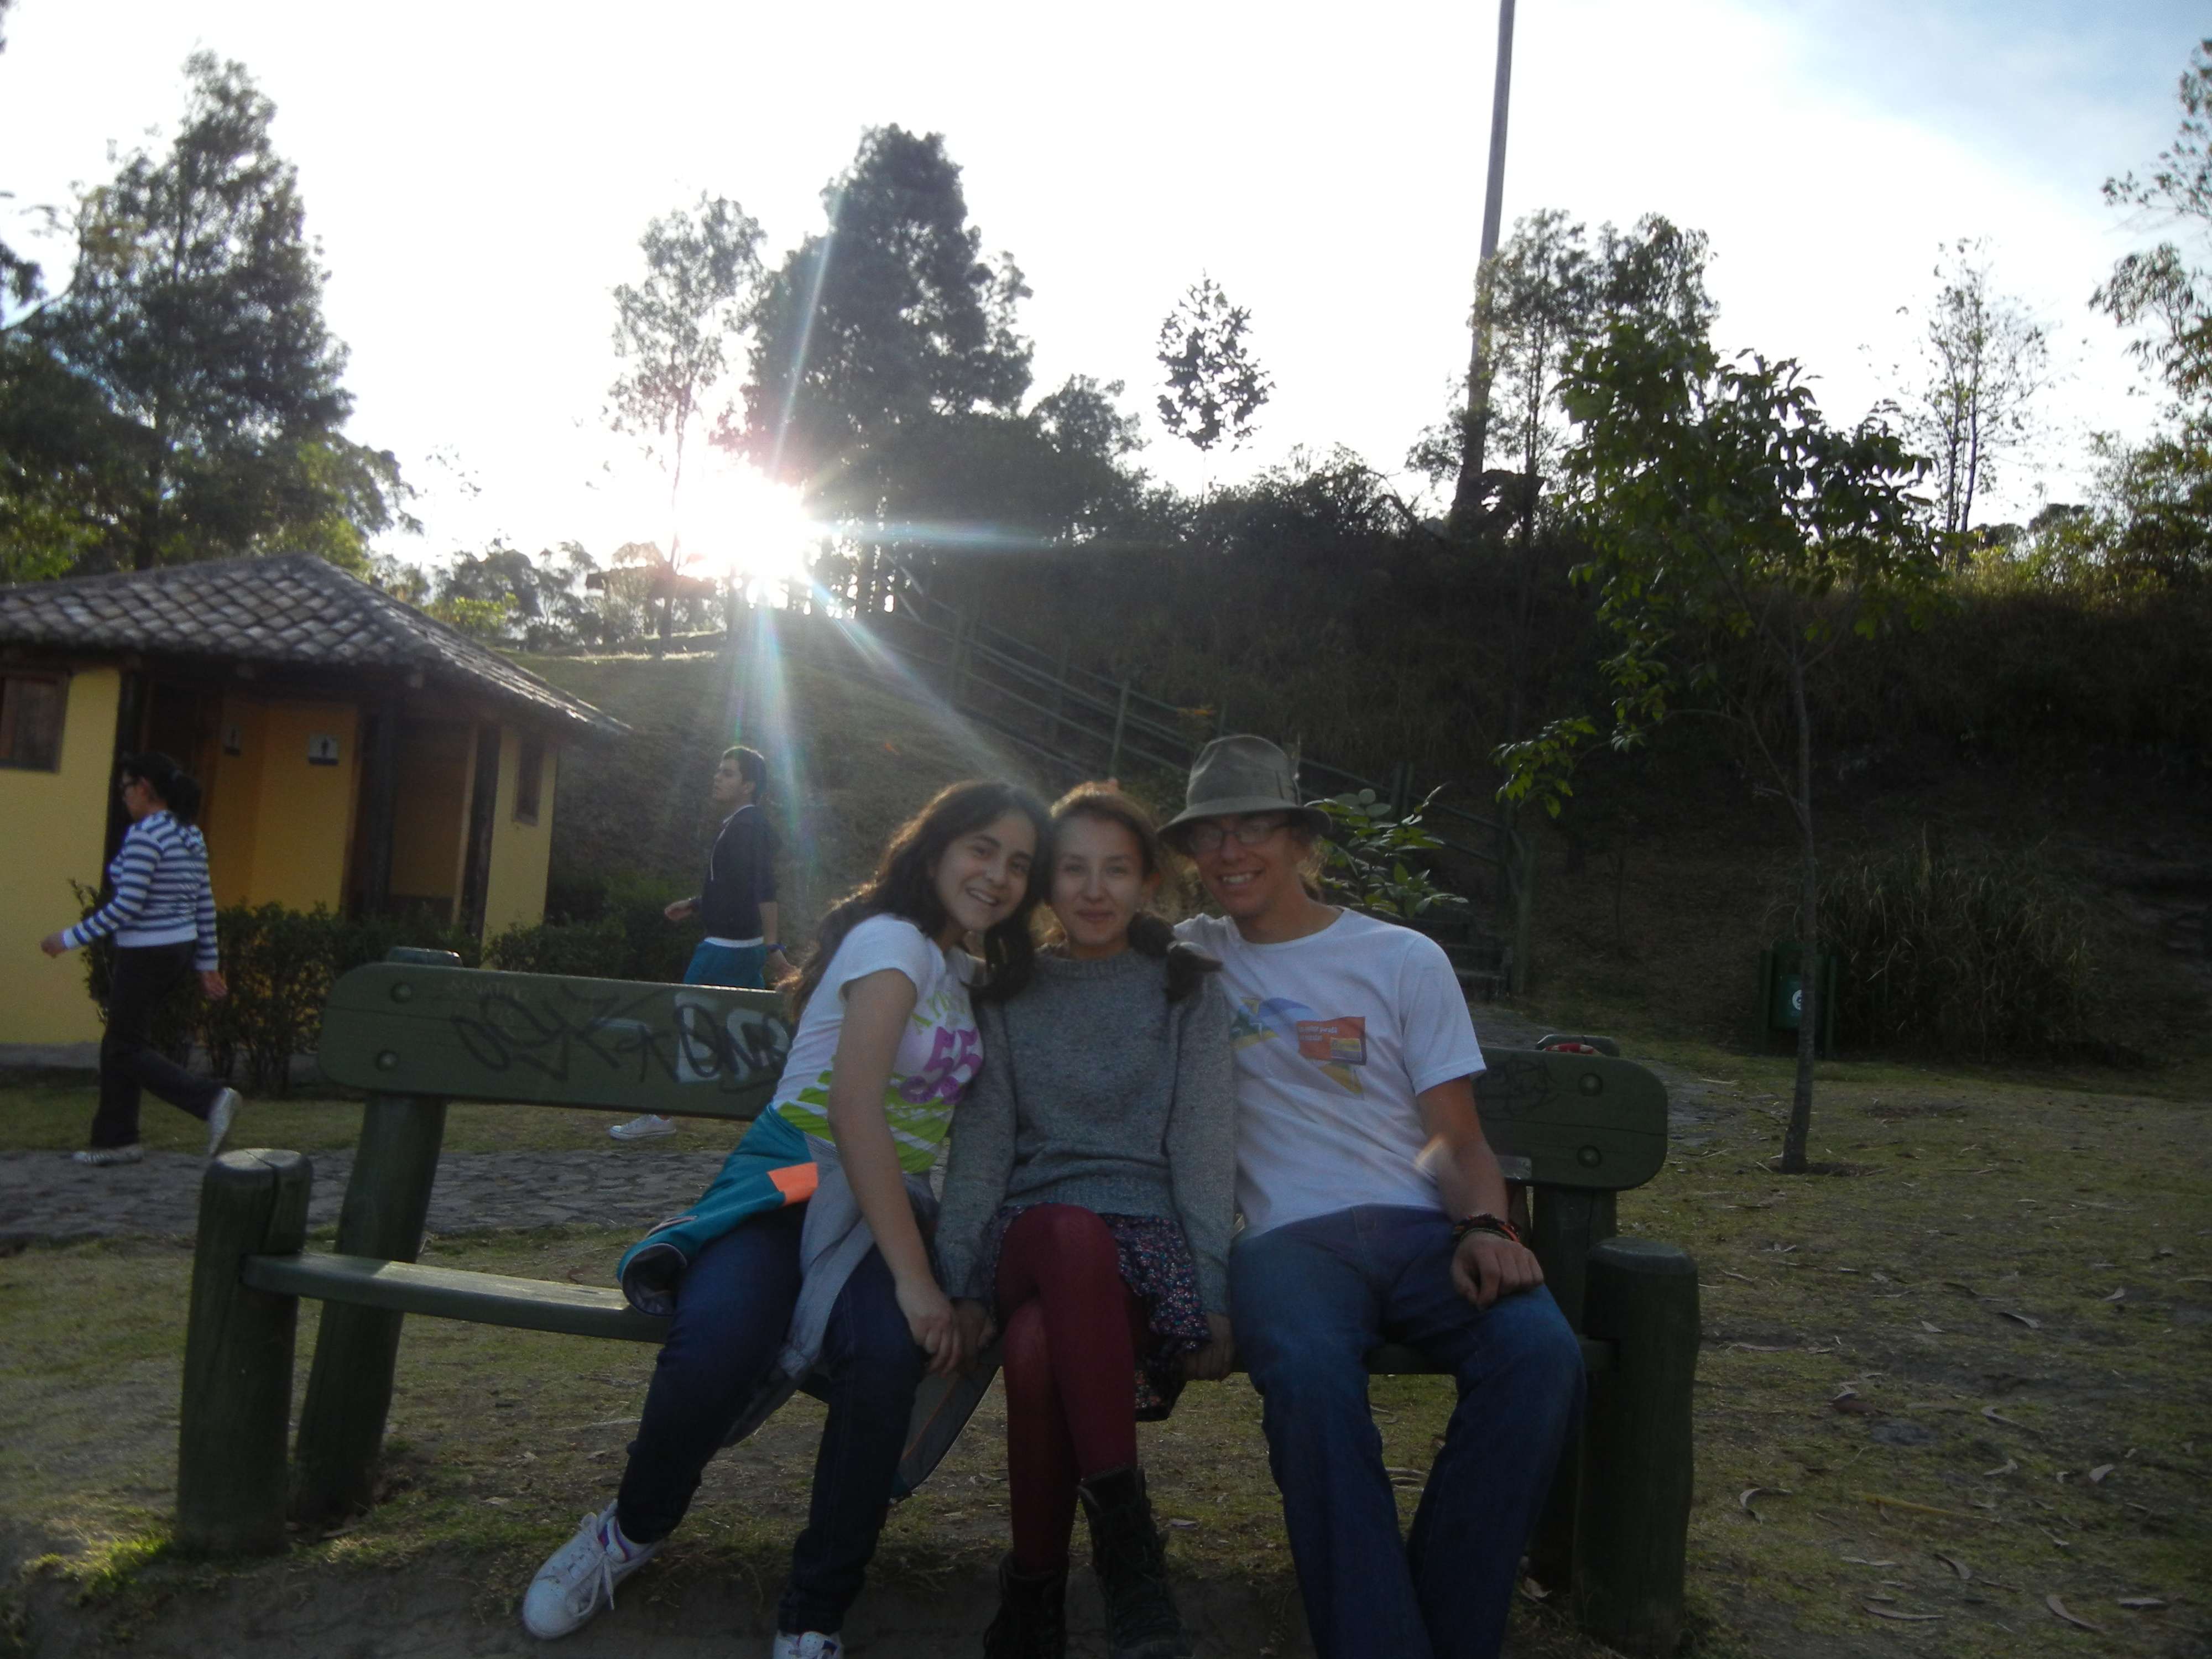 Three people on a bench in front of a sunset